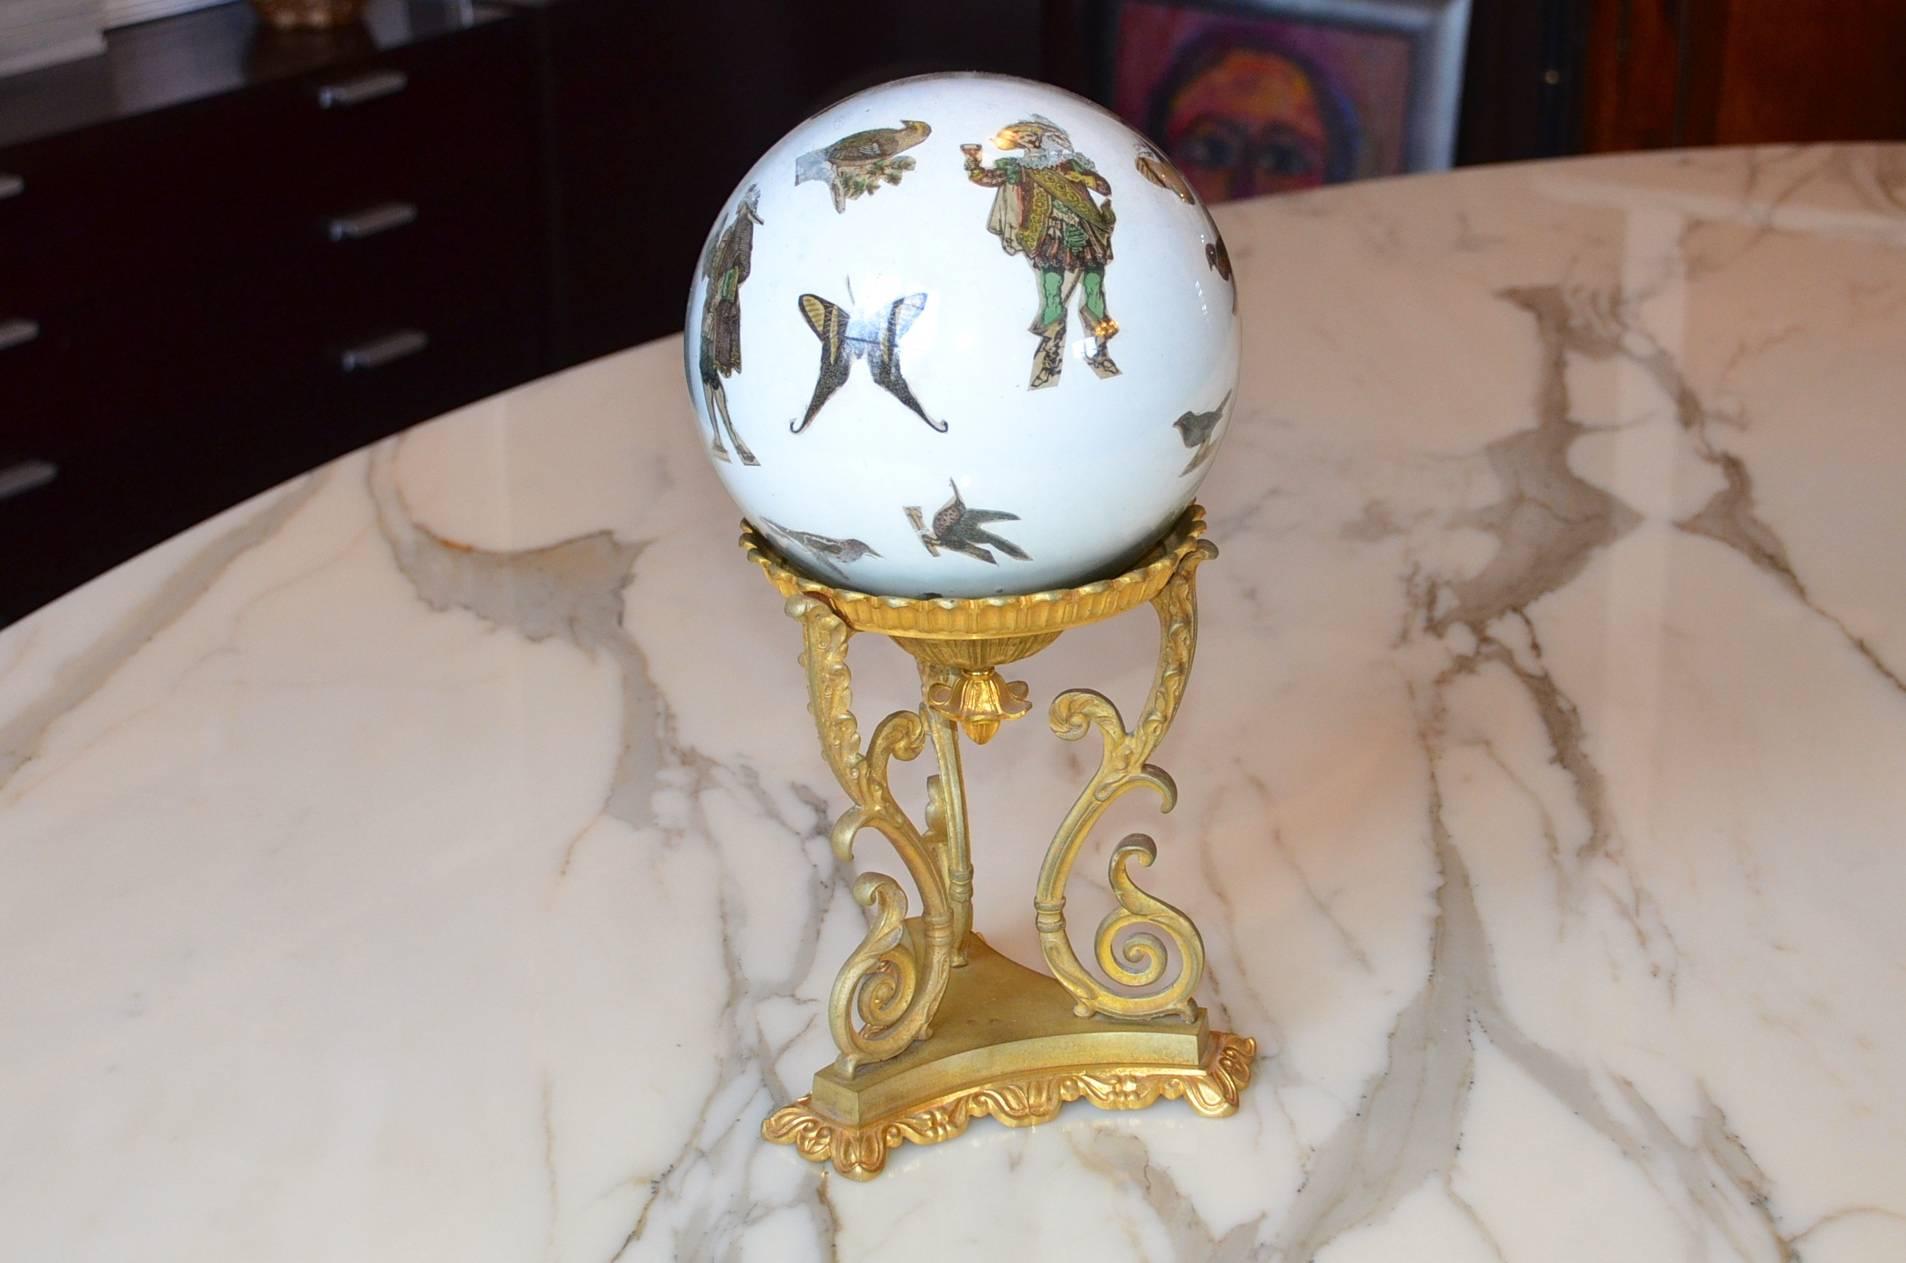 Decorative glass globe on a gilded bronze stand. The globe is finely decorated. It looks like a Murano technique although it comes from France. It rests on a beautiful gilded bronze stand with floral decoration. The usage it's a kind of mystery to